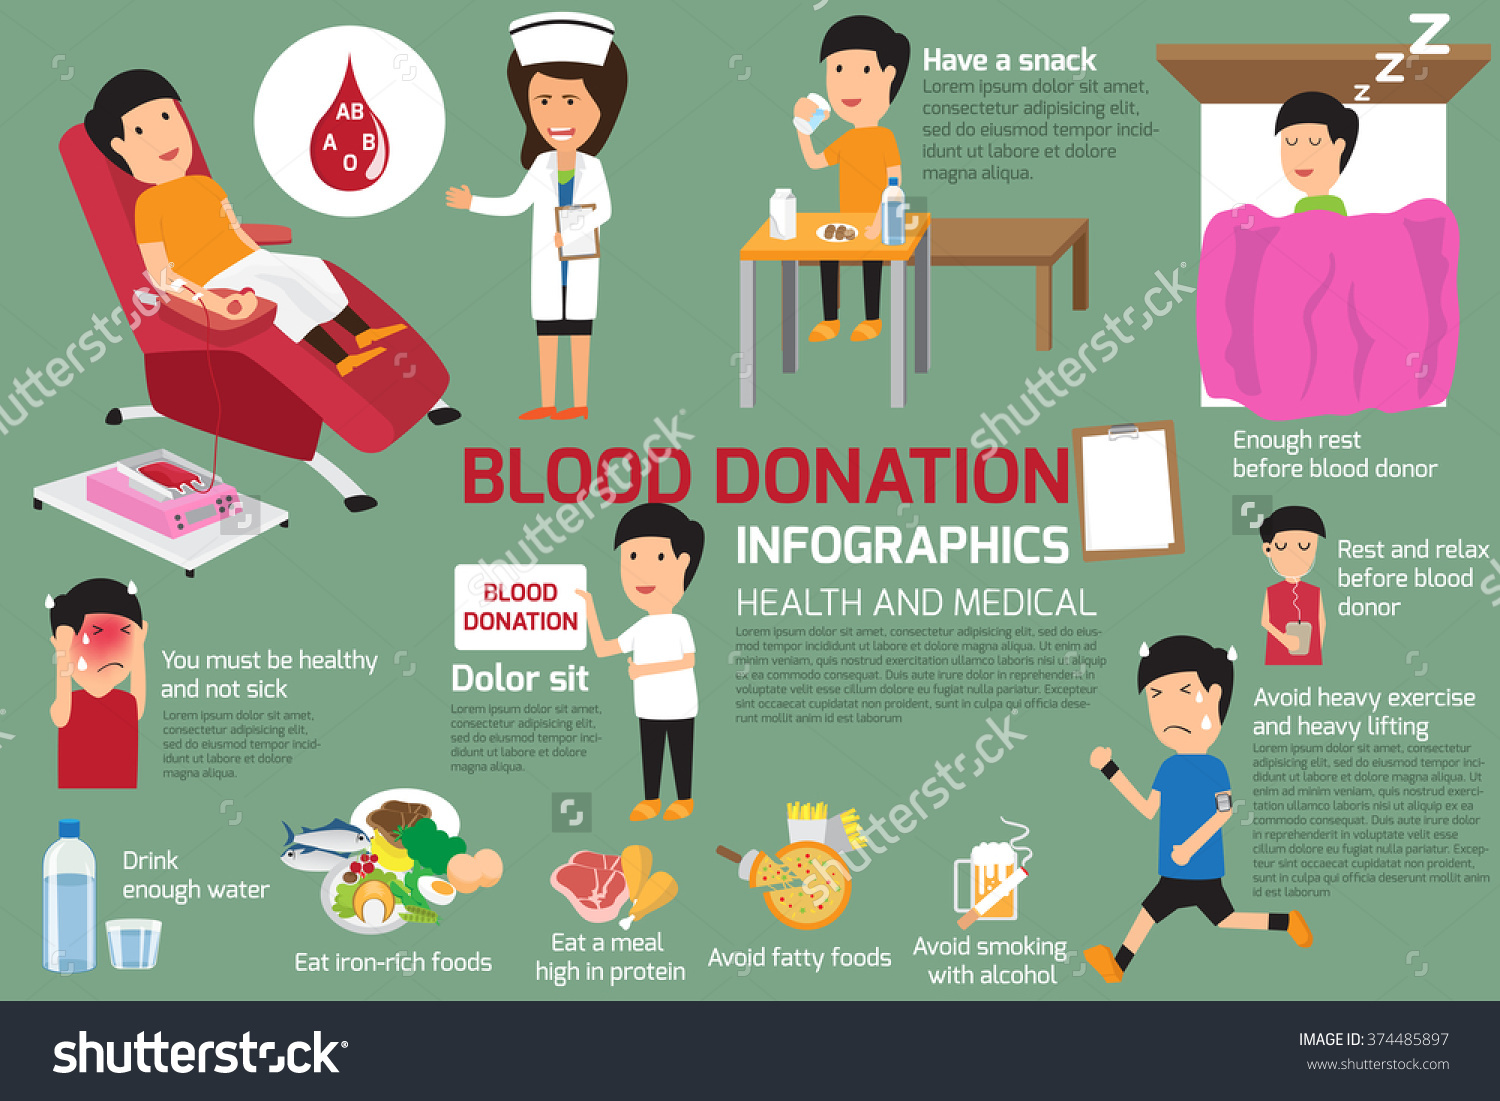 How to donate